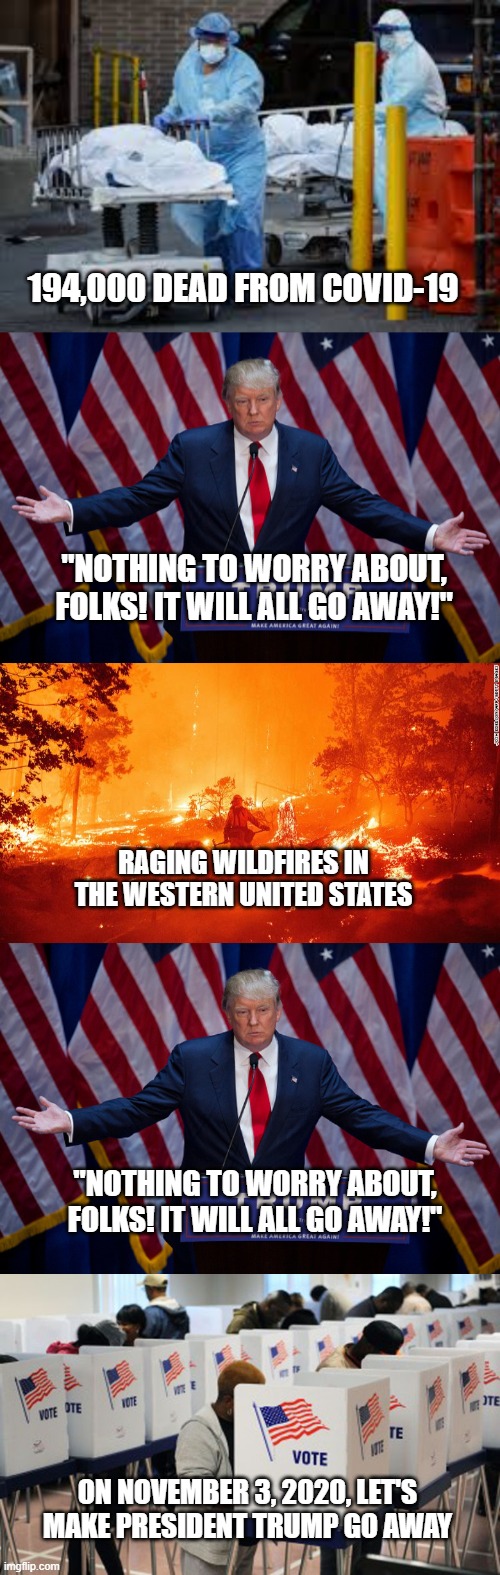 Blood on his hands | 194,000 DEAD FROM COVID-19; "NOTHING TO WORRY ABOUT, FOLKS! IT WILL ALL GO AWAY!"; RAGING WILDFIRES IN THE WESTERN UNITED STATES; "NOTHING TO WORRY ABOUT, FOLKS! IT WILL ALL GO AWAY!"; ON NOVEMBER 3, 2020, LET'S MAKE PRESIDENT TRUMP GO AWAY | image tagged in donald trump,blood on his hands,incompetent | made w/ Imgflip meme maker